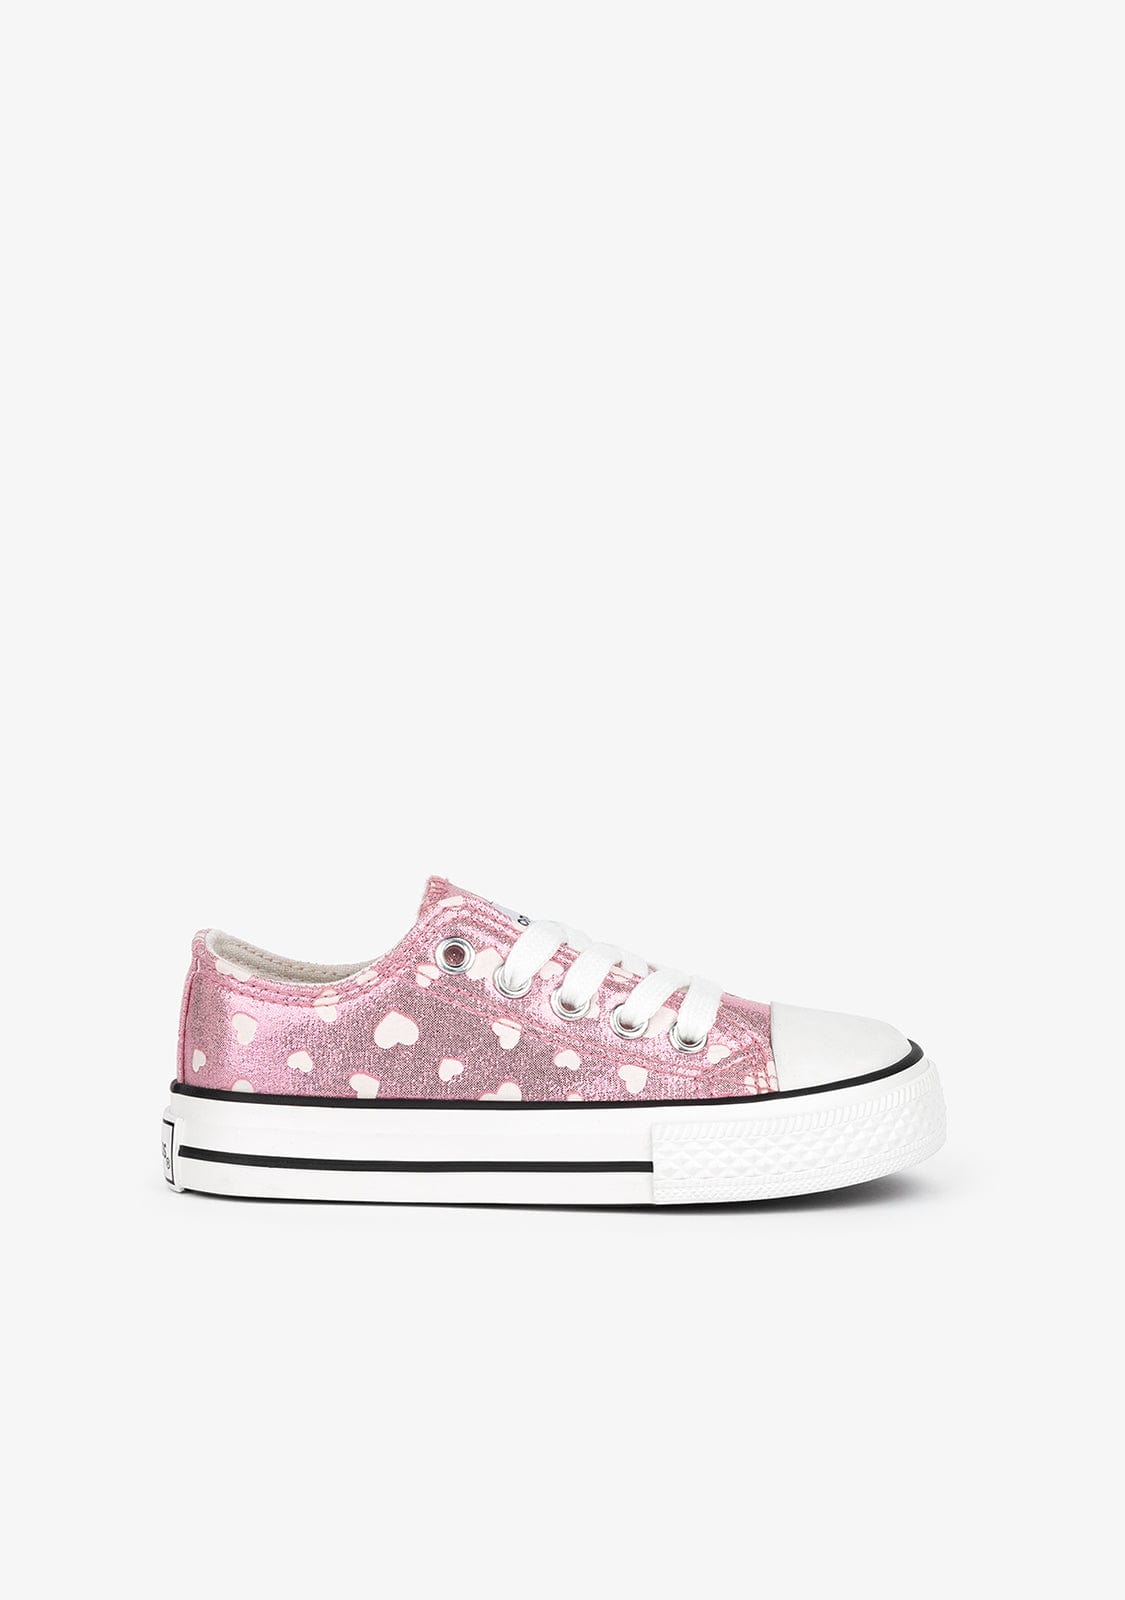 CONGUITOS Shoes Girl's Pink Glows in the Dark Sneakers